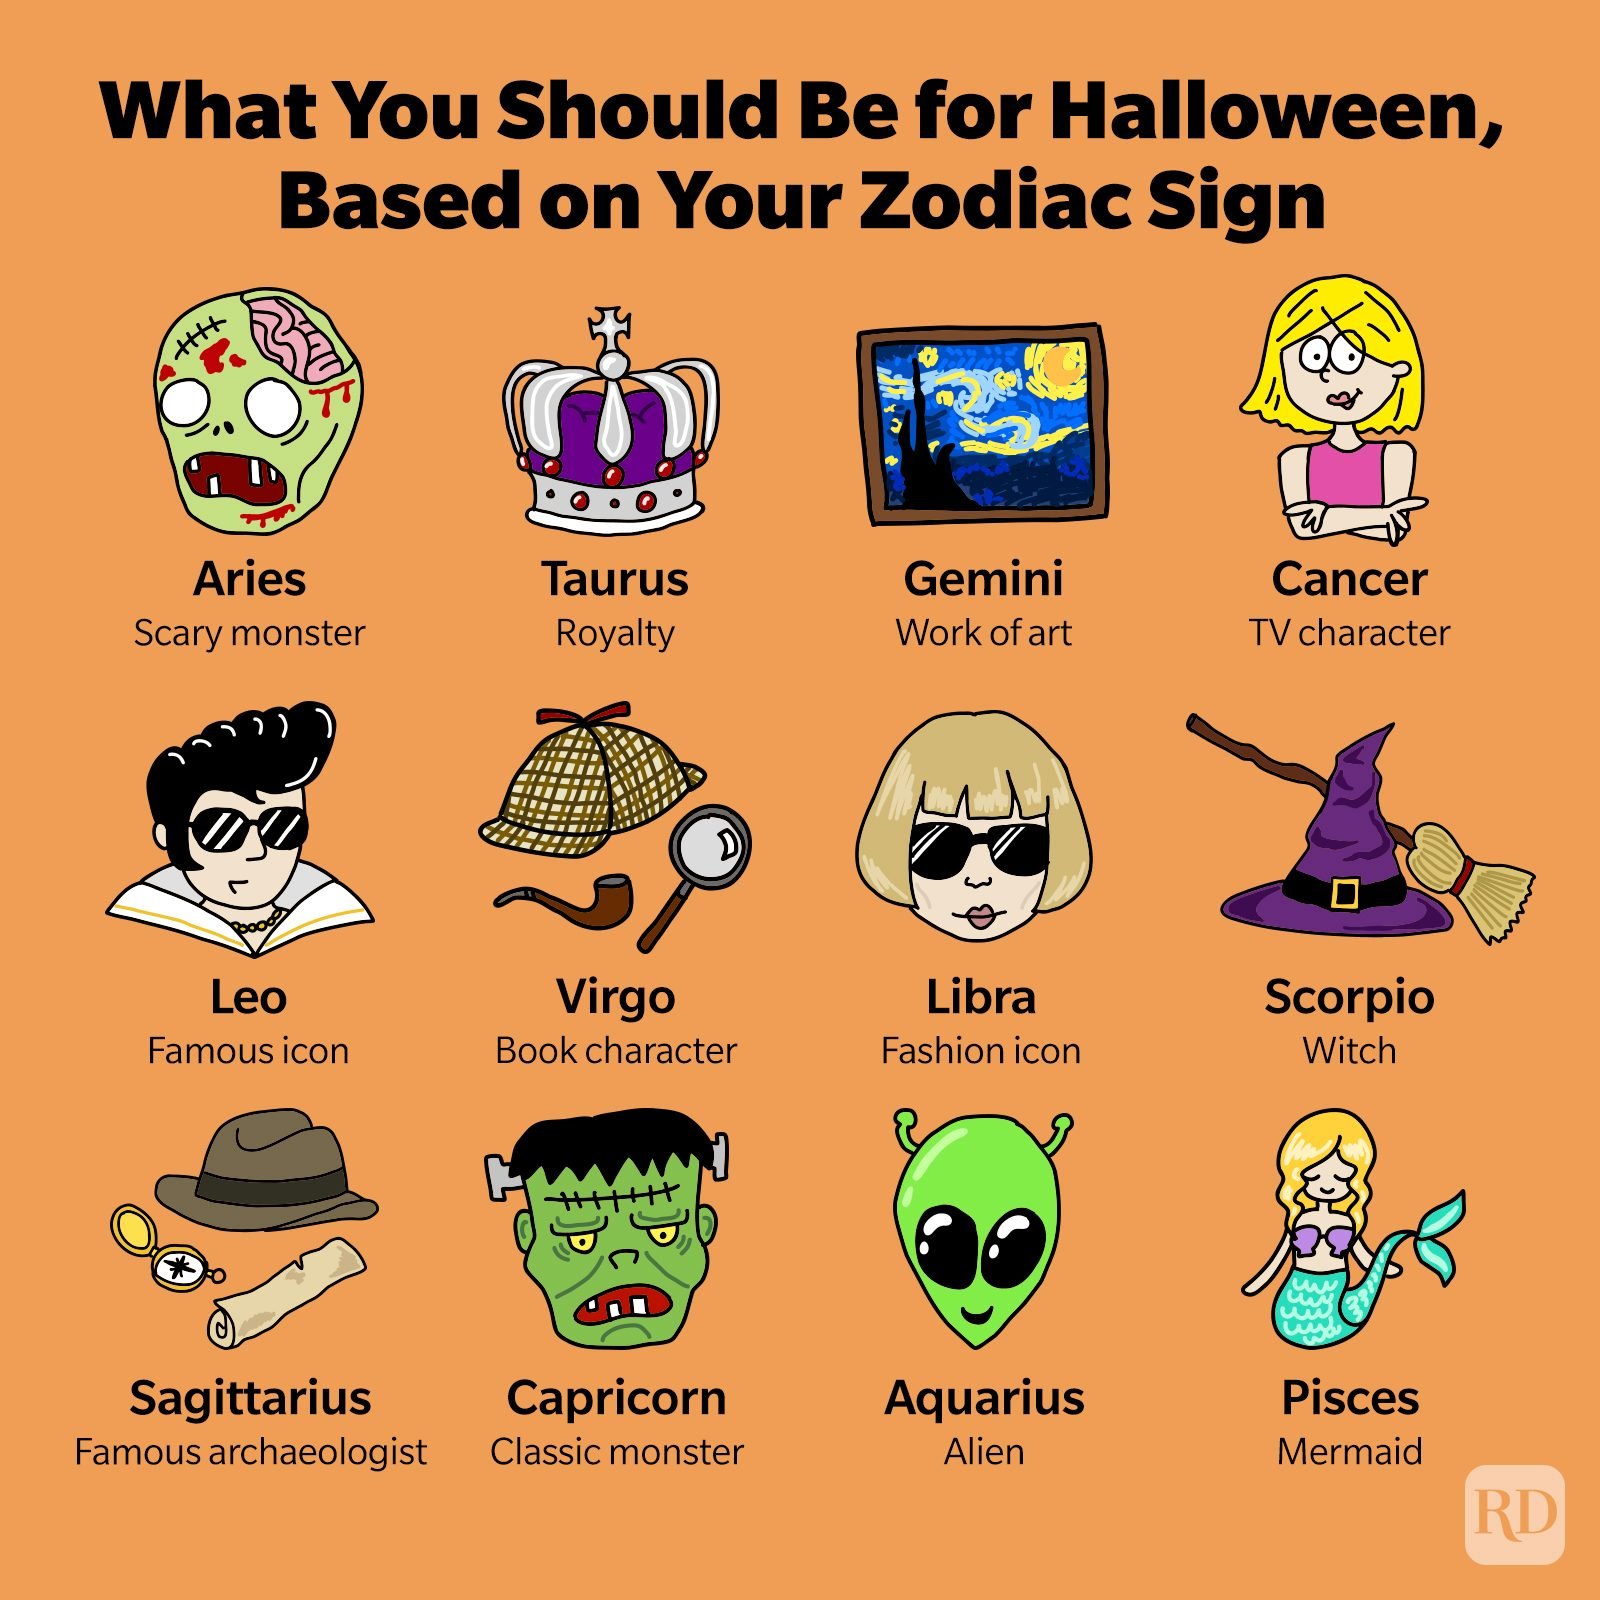 Meyers-Briggs Types As Halloween Monsters: Which One Are You